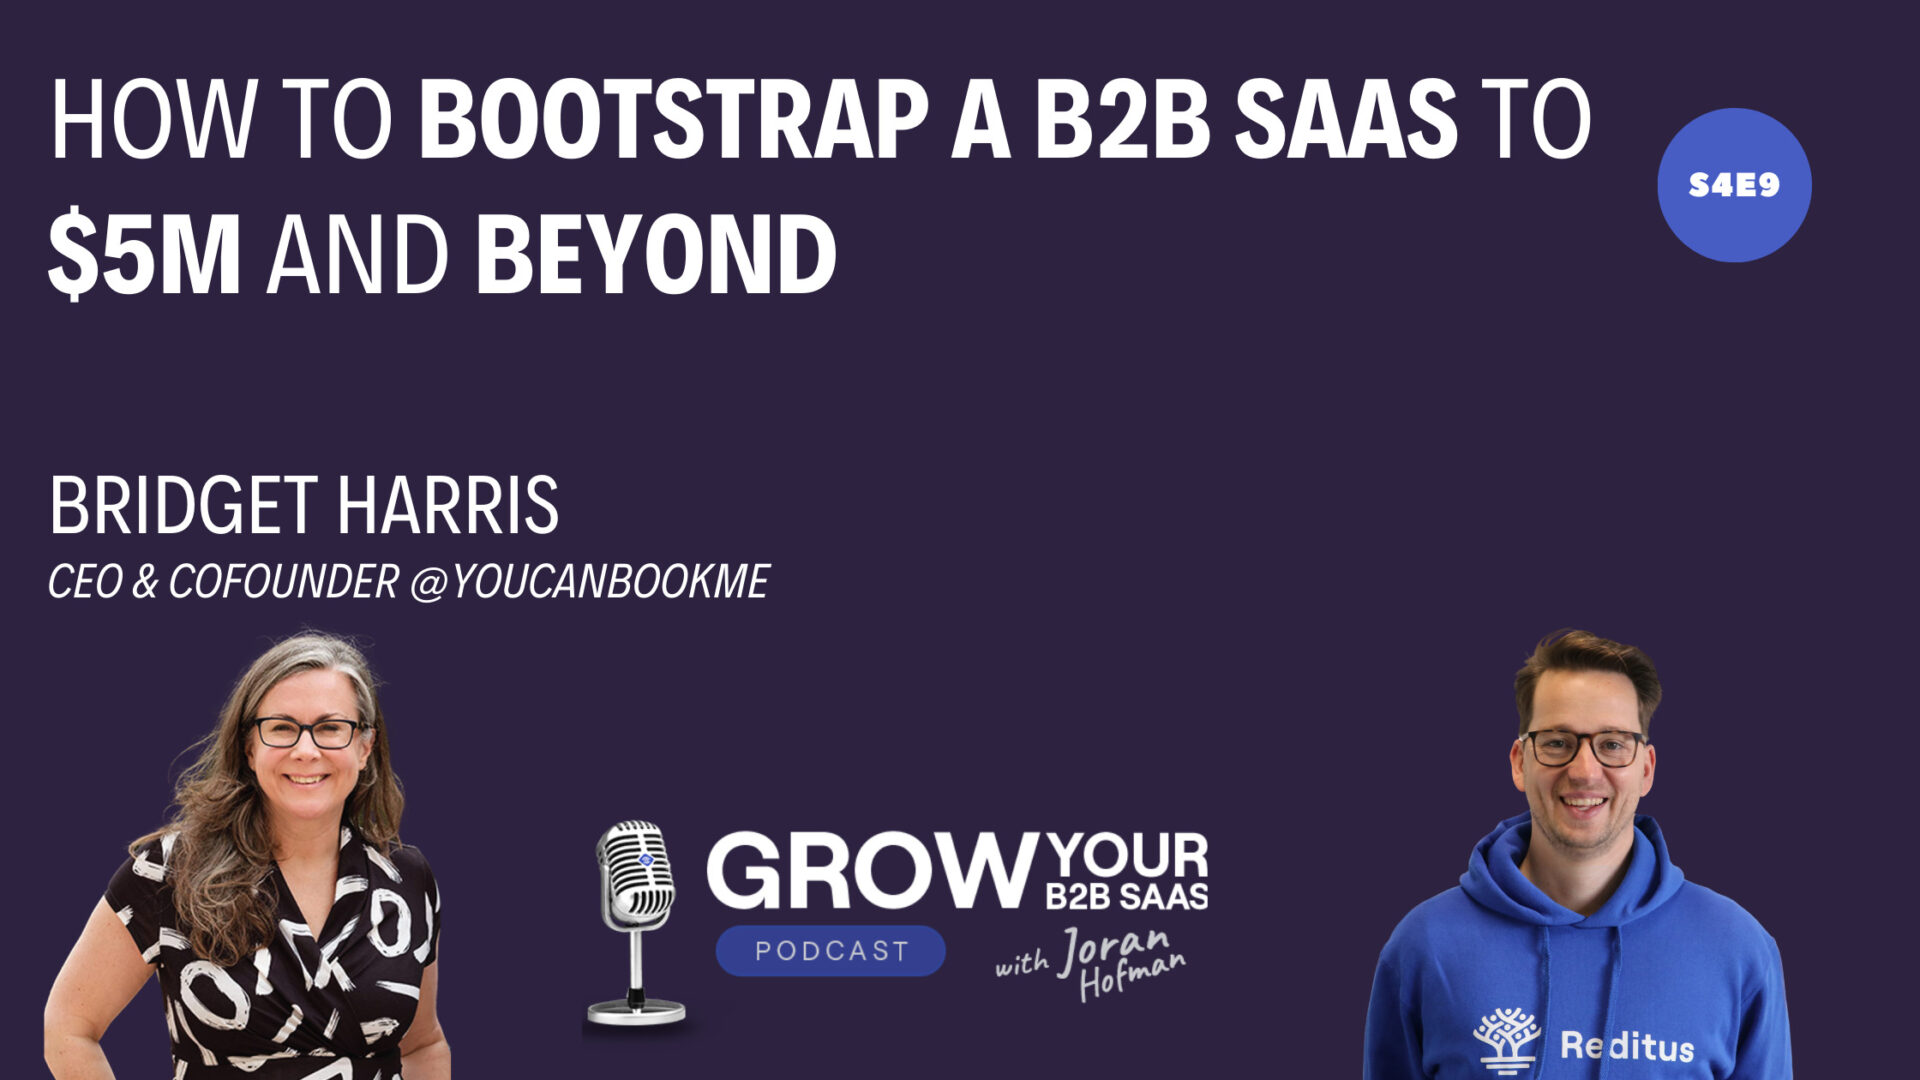 S4E9 – How to Bootstrap a B2B SaaS to $5M and Beyond With Bridget Harris